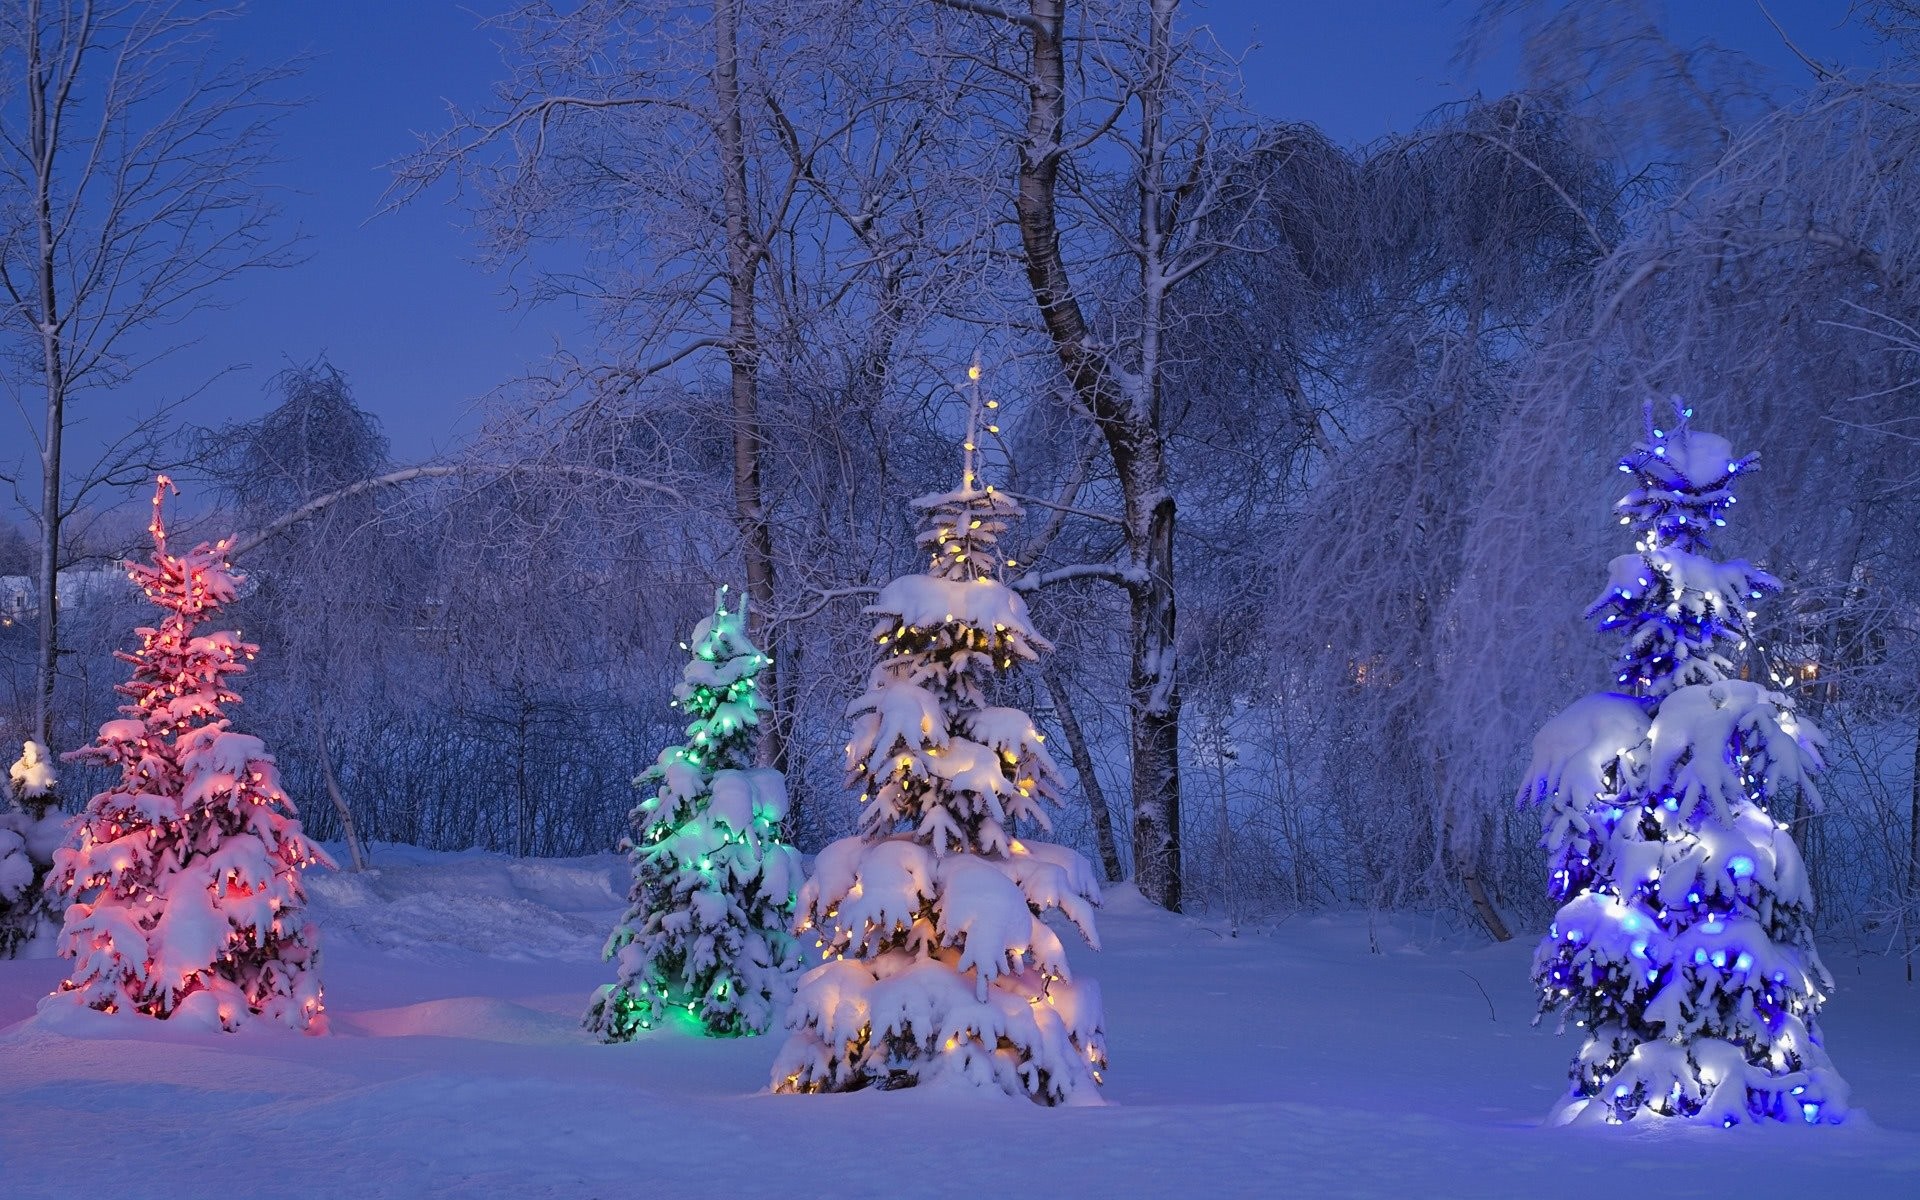 1920x1200 You can check out this list of winter and Christmas themes for Windows 7  published by Microsoft as a starting point. They have been designed for Windows  7, ...